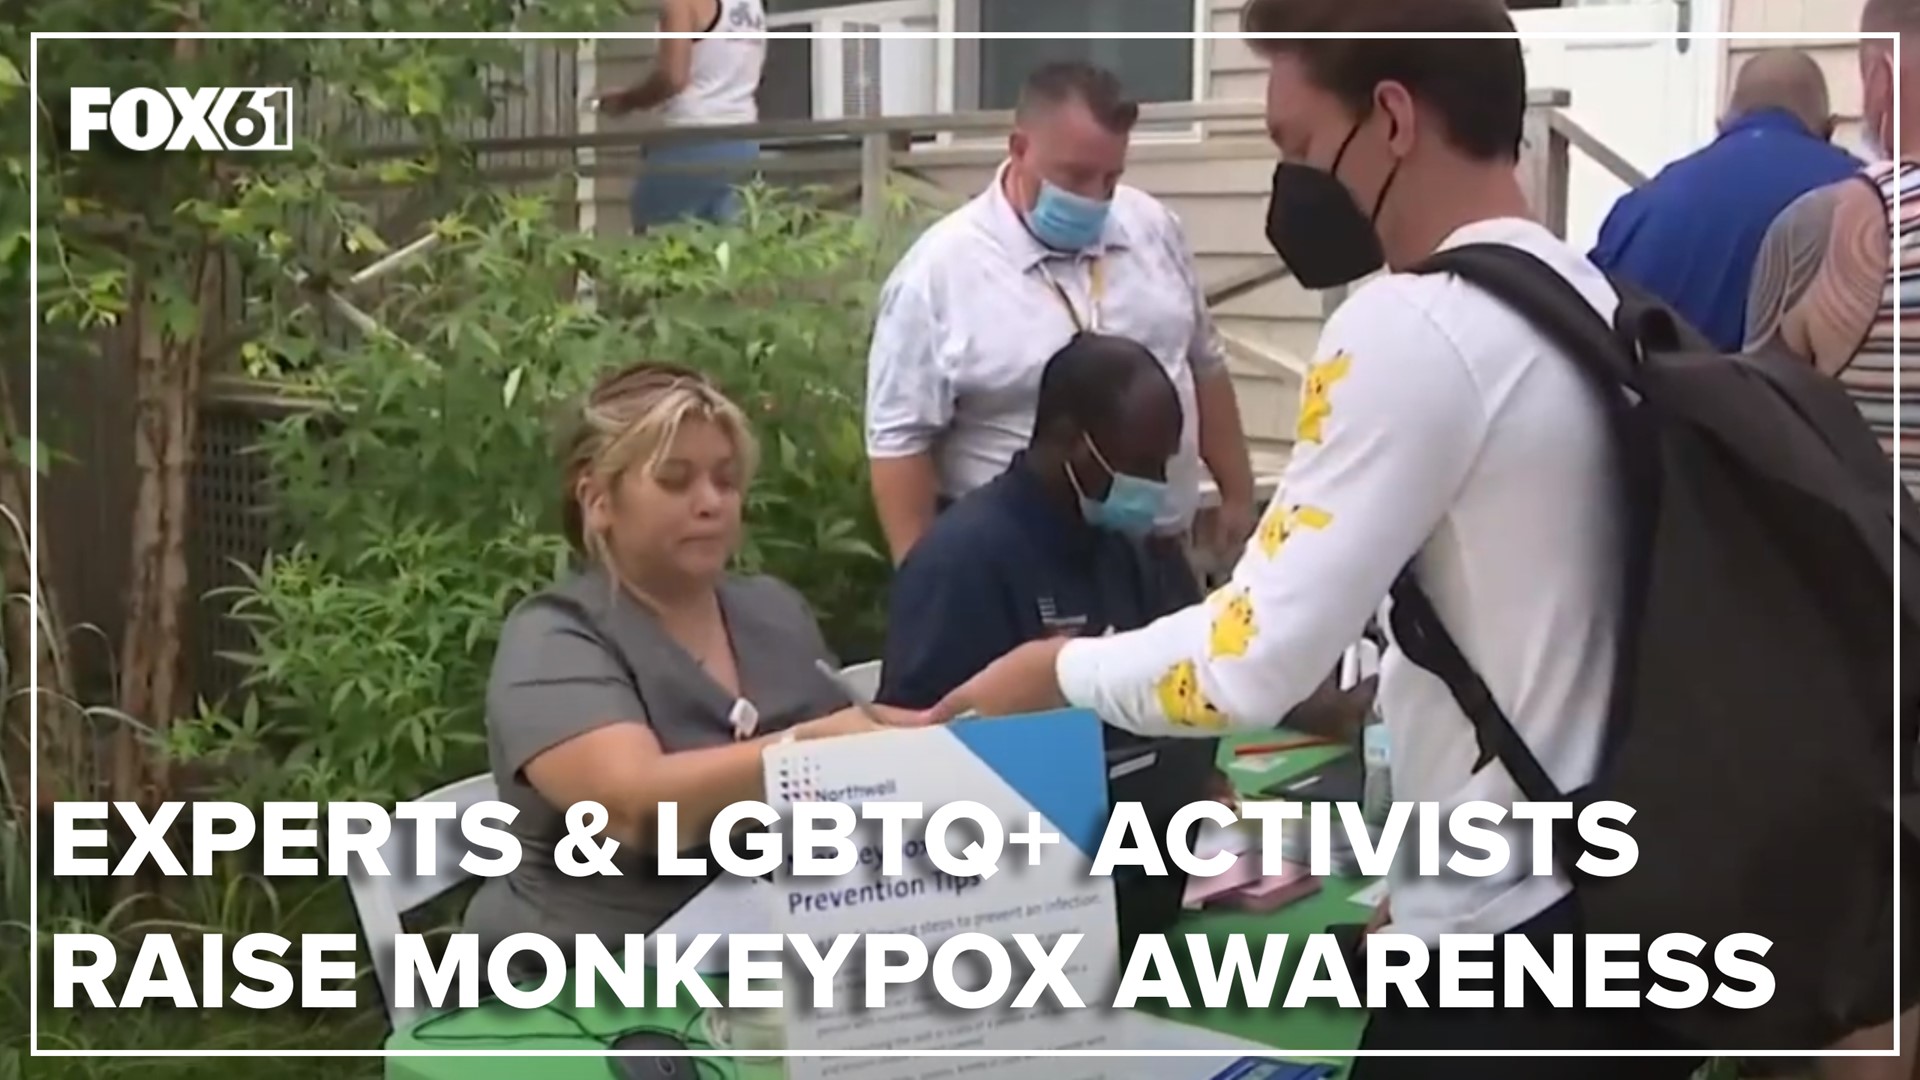 Connecticut has confirmed 15 cases of monkeypox.